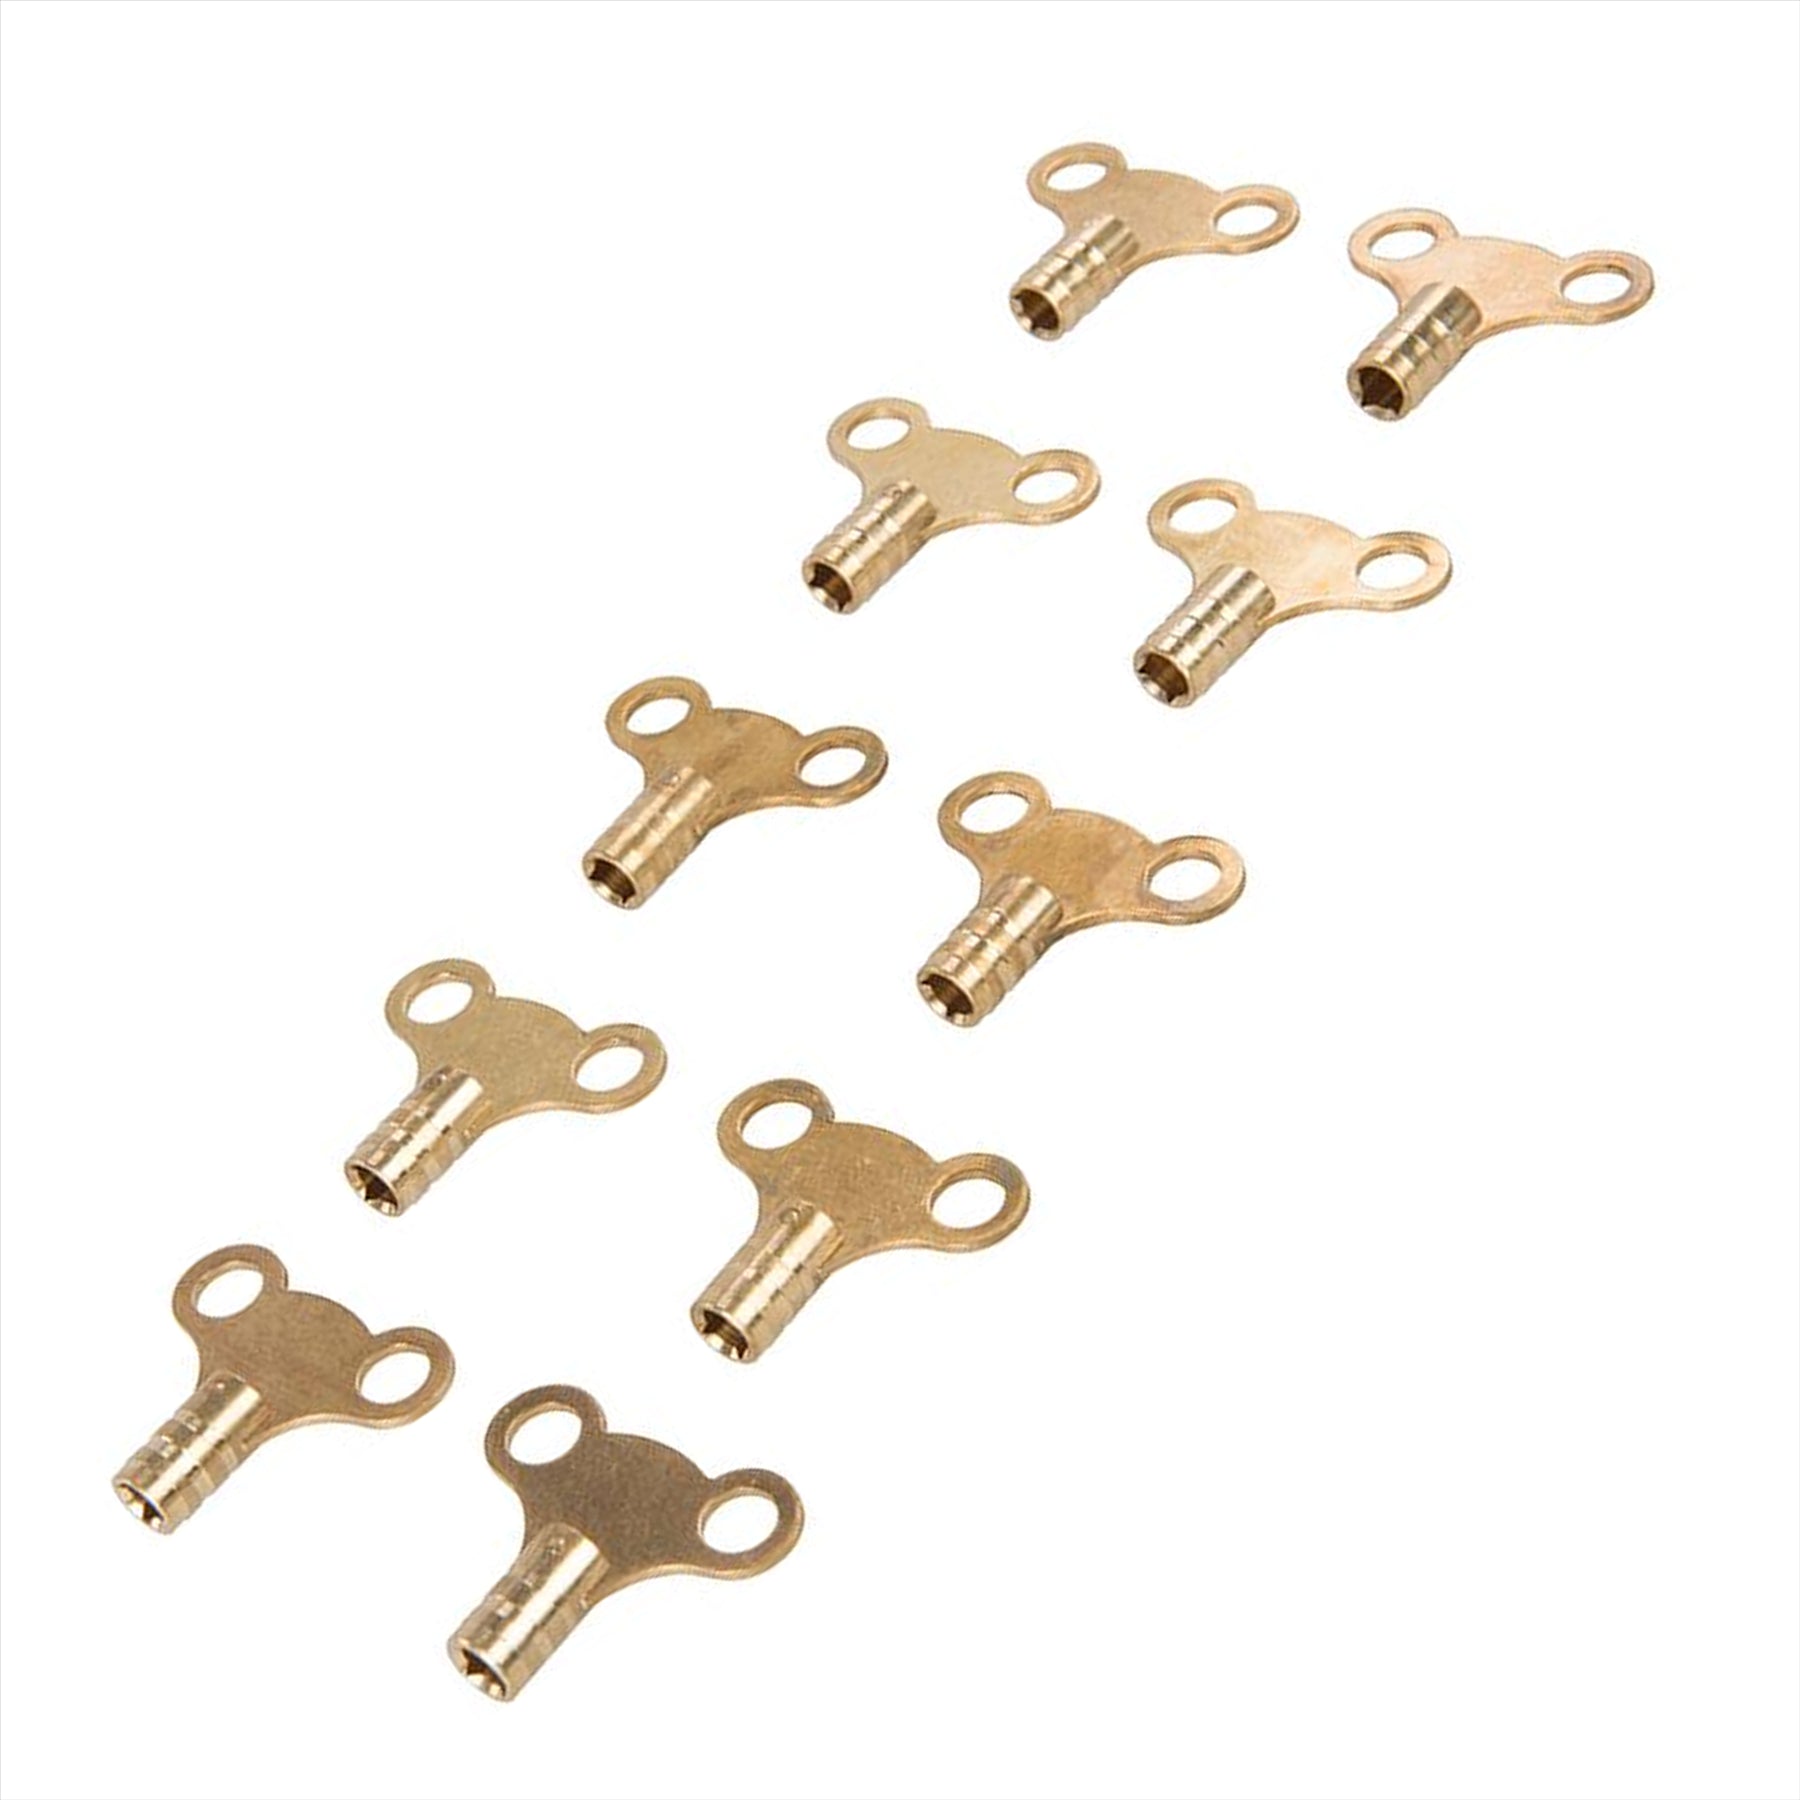 Radiator Bleed Keys Brass Clock-Type Corossion Resistant For Air Vents 10Pk